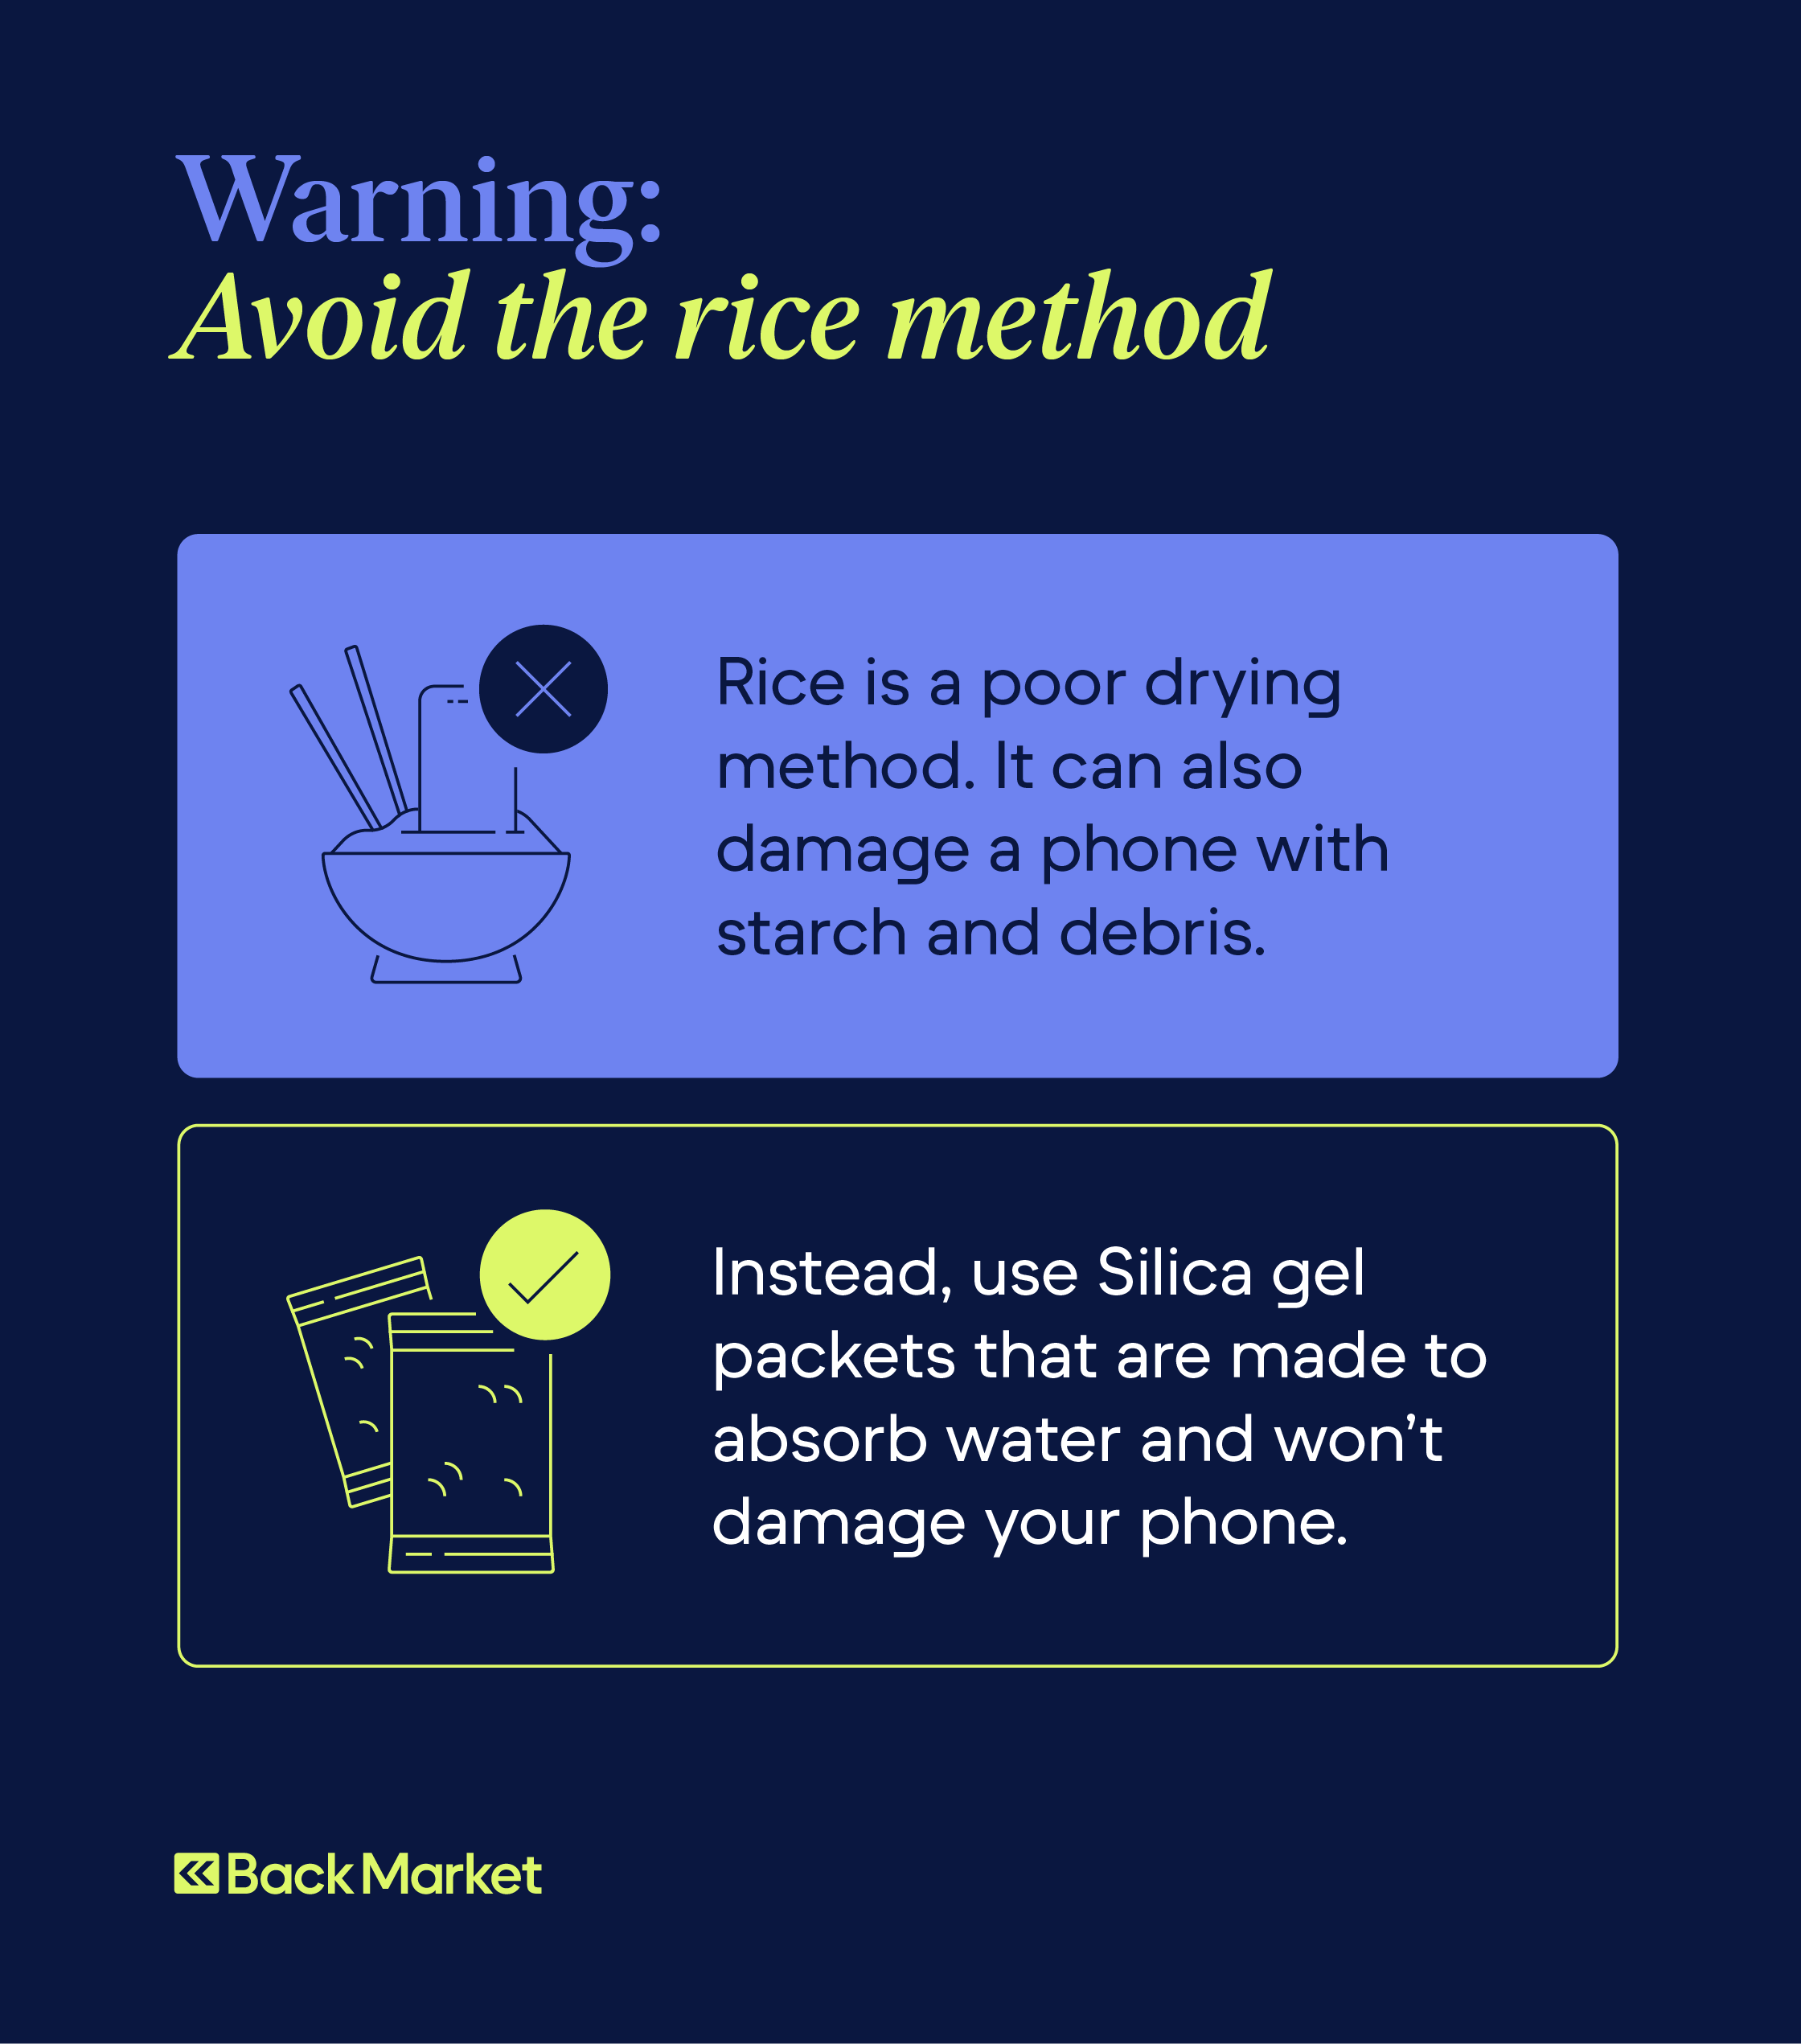 A graphic warns readers to avoid placing their water damaged phone in rice.